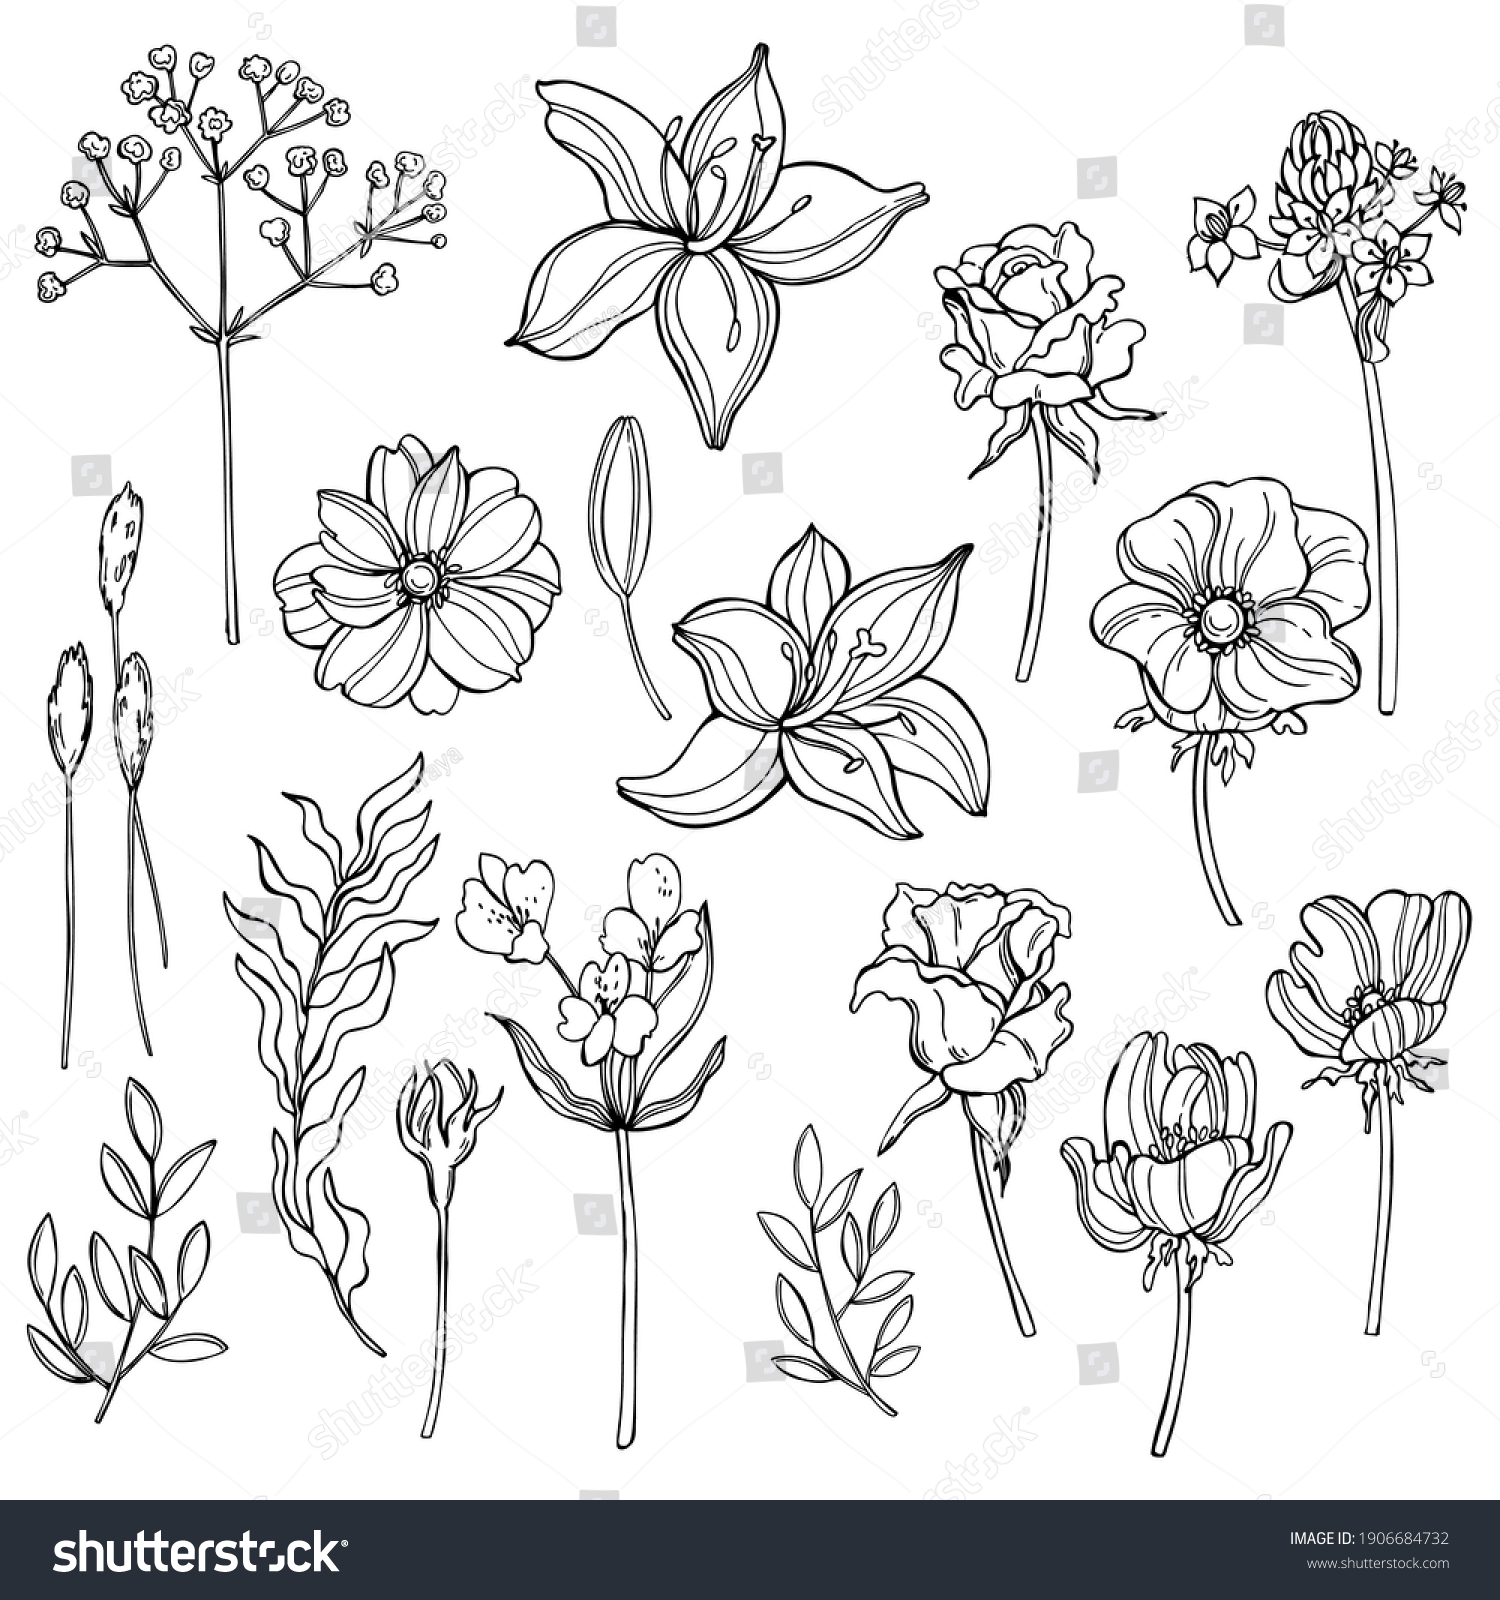 788,610 Rose Drawing Images, Stock Photos & Vectors | Shutterstock